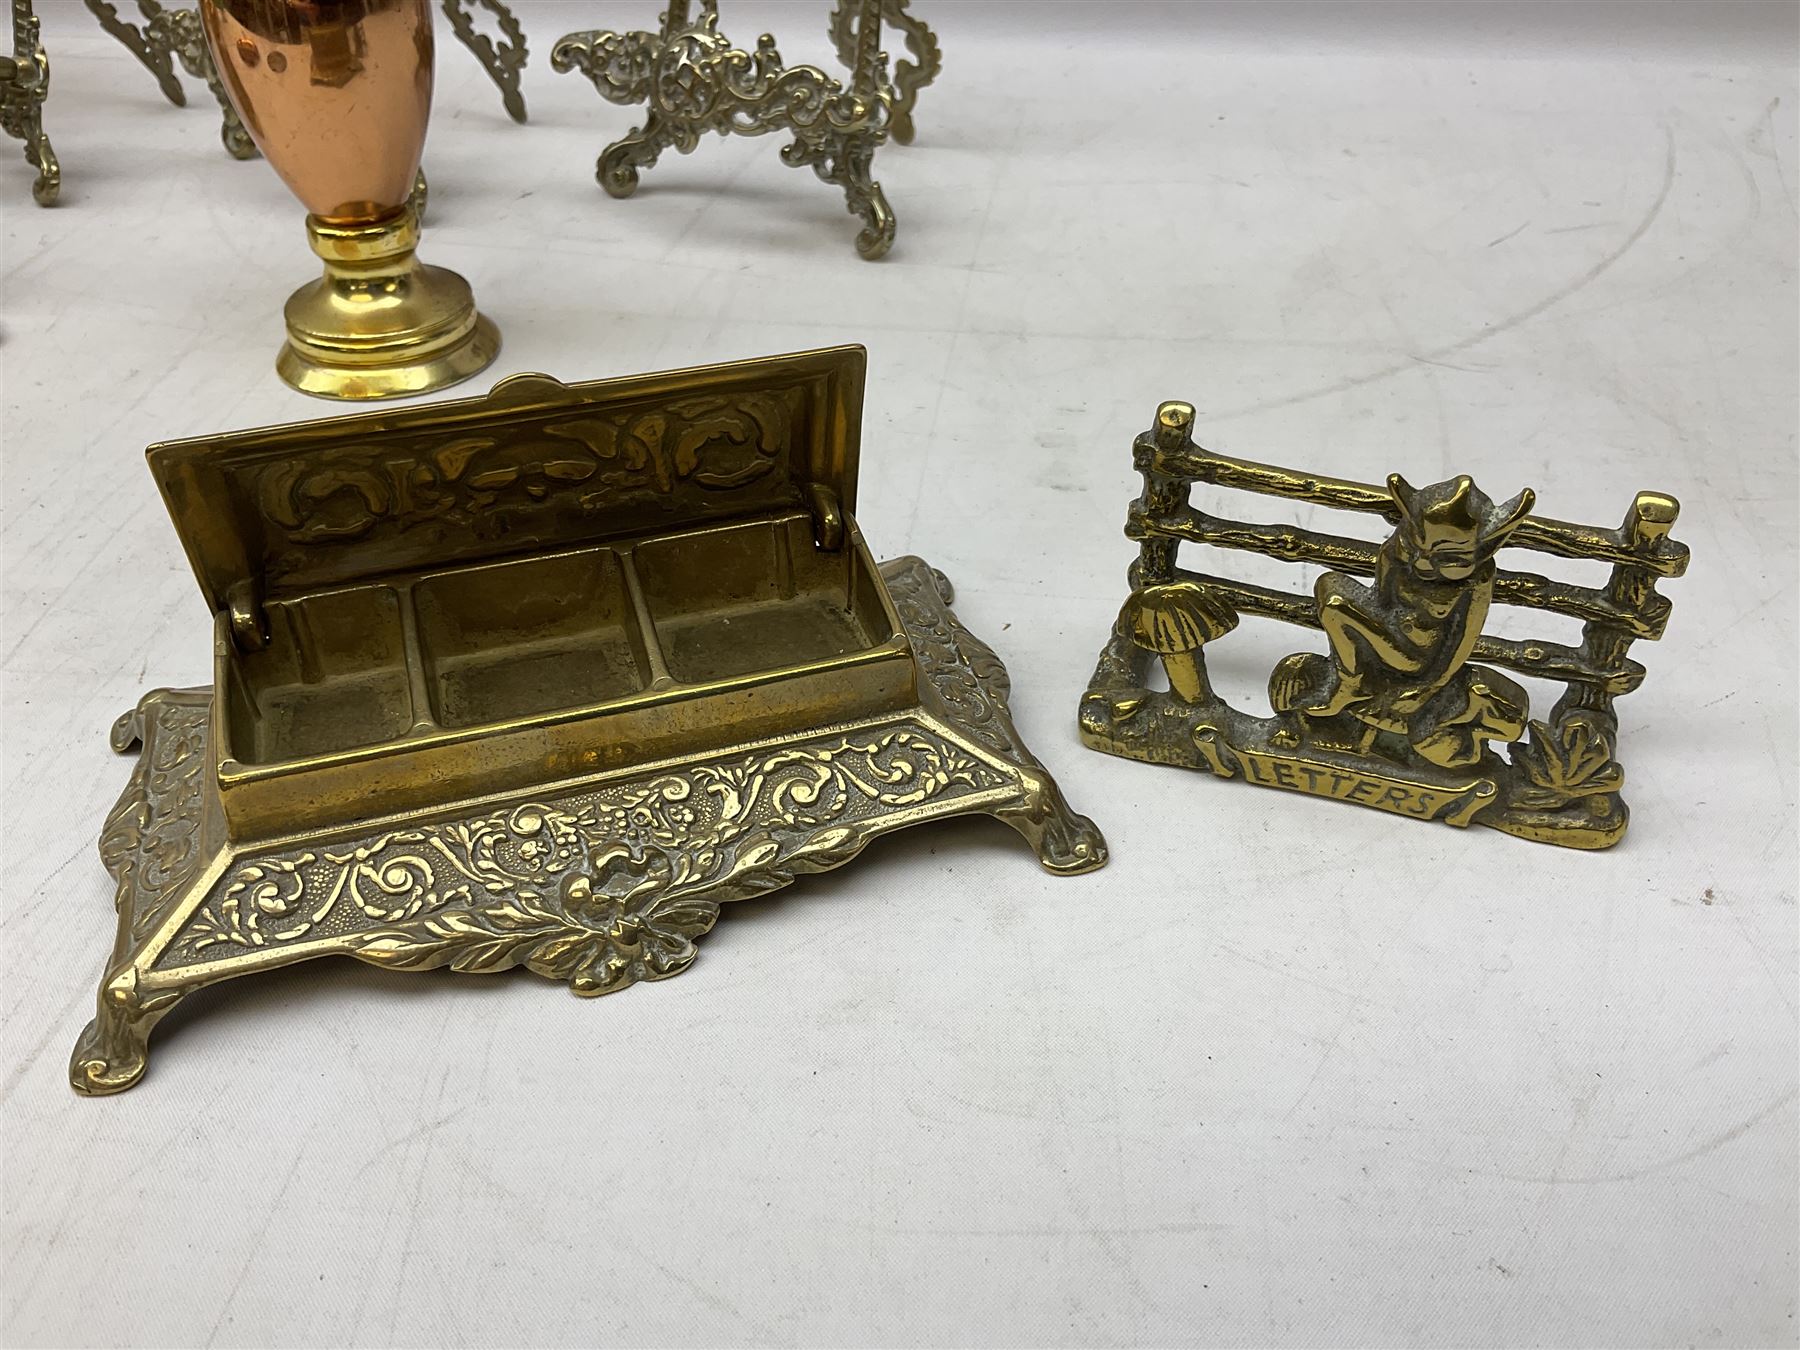 Ornate brass inkstand with ceramic inkwell - Image 4 of 12